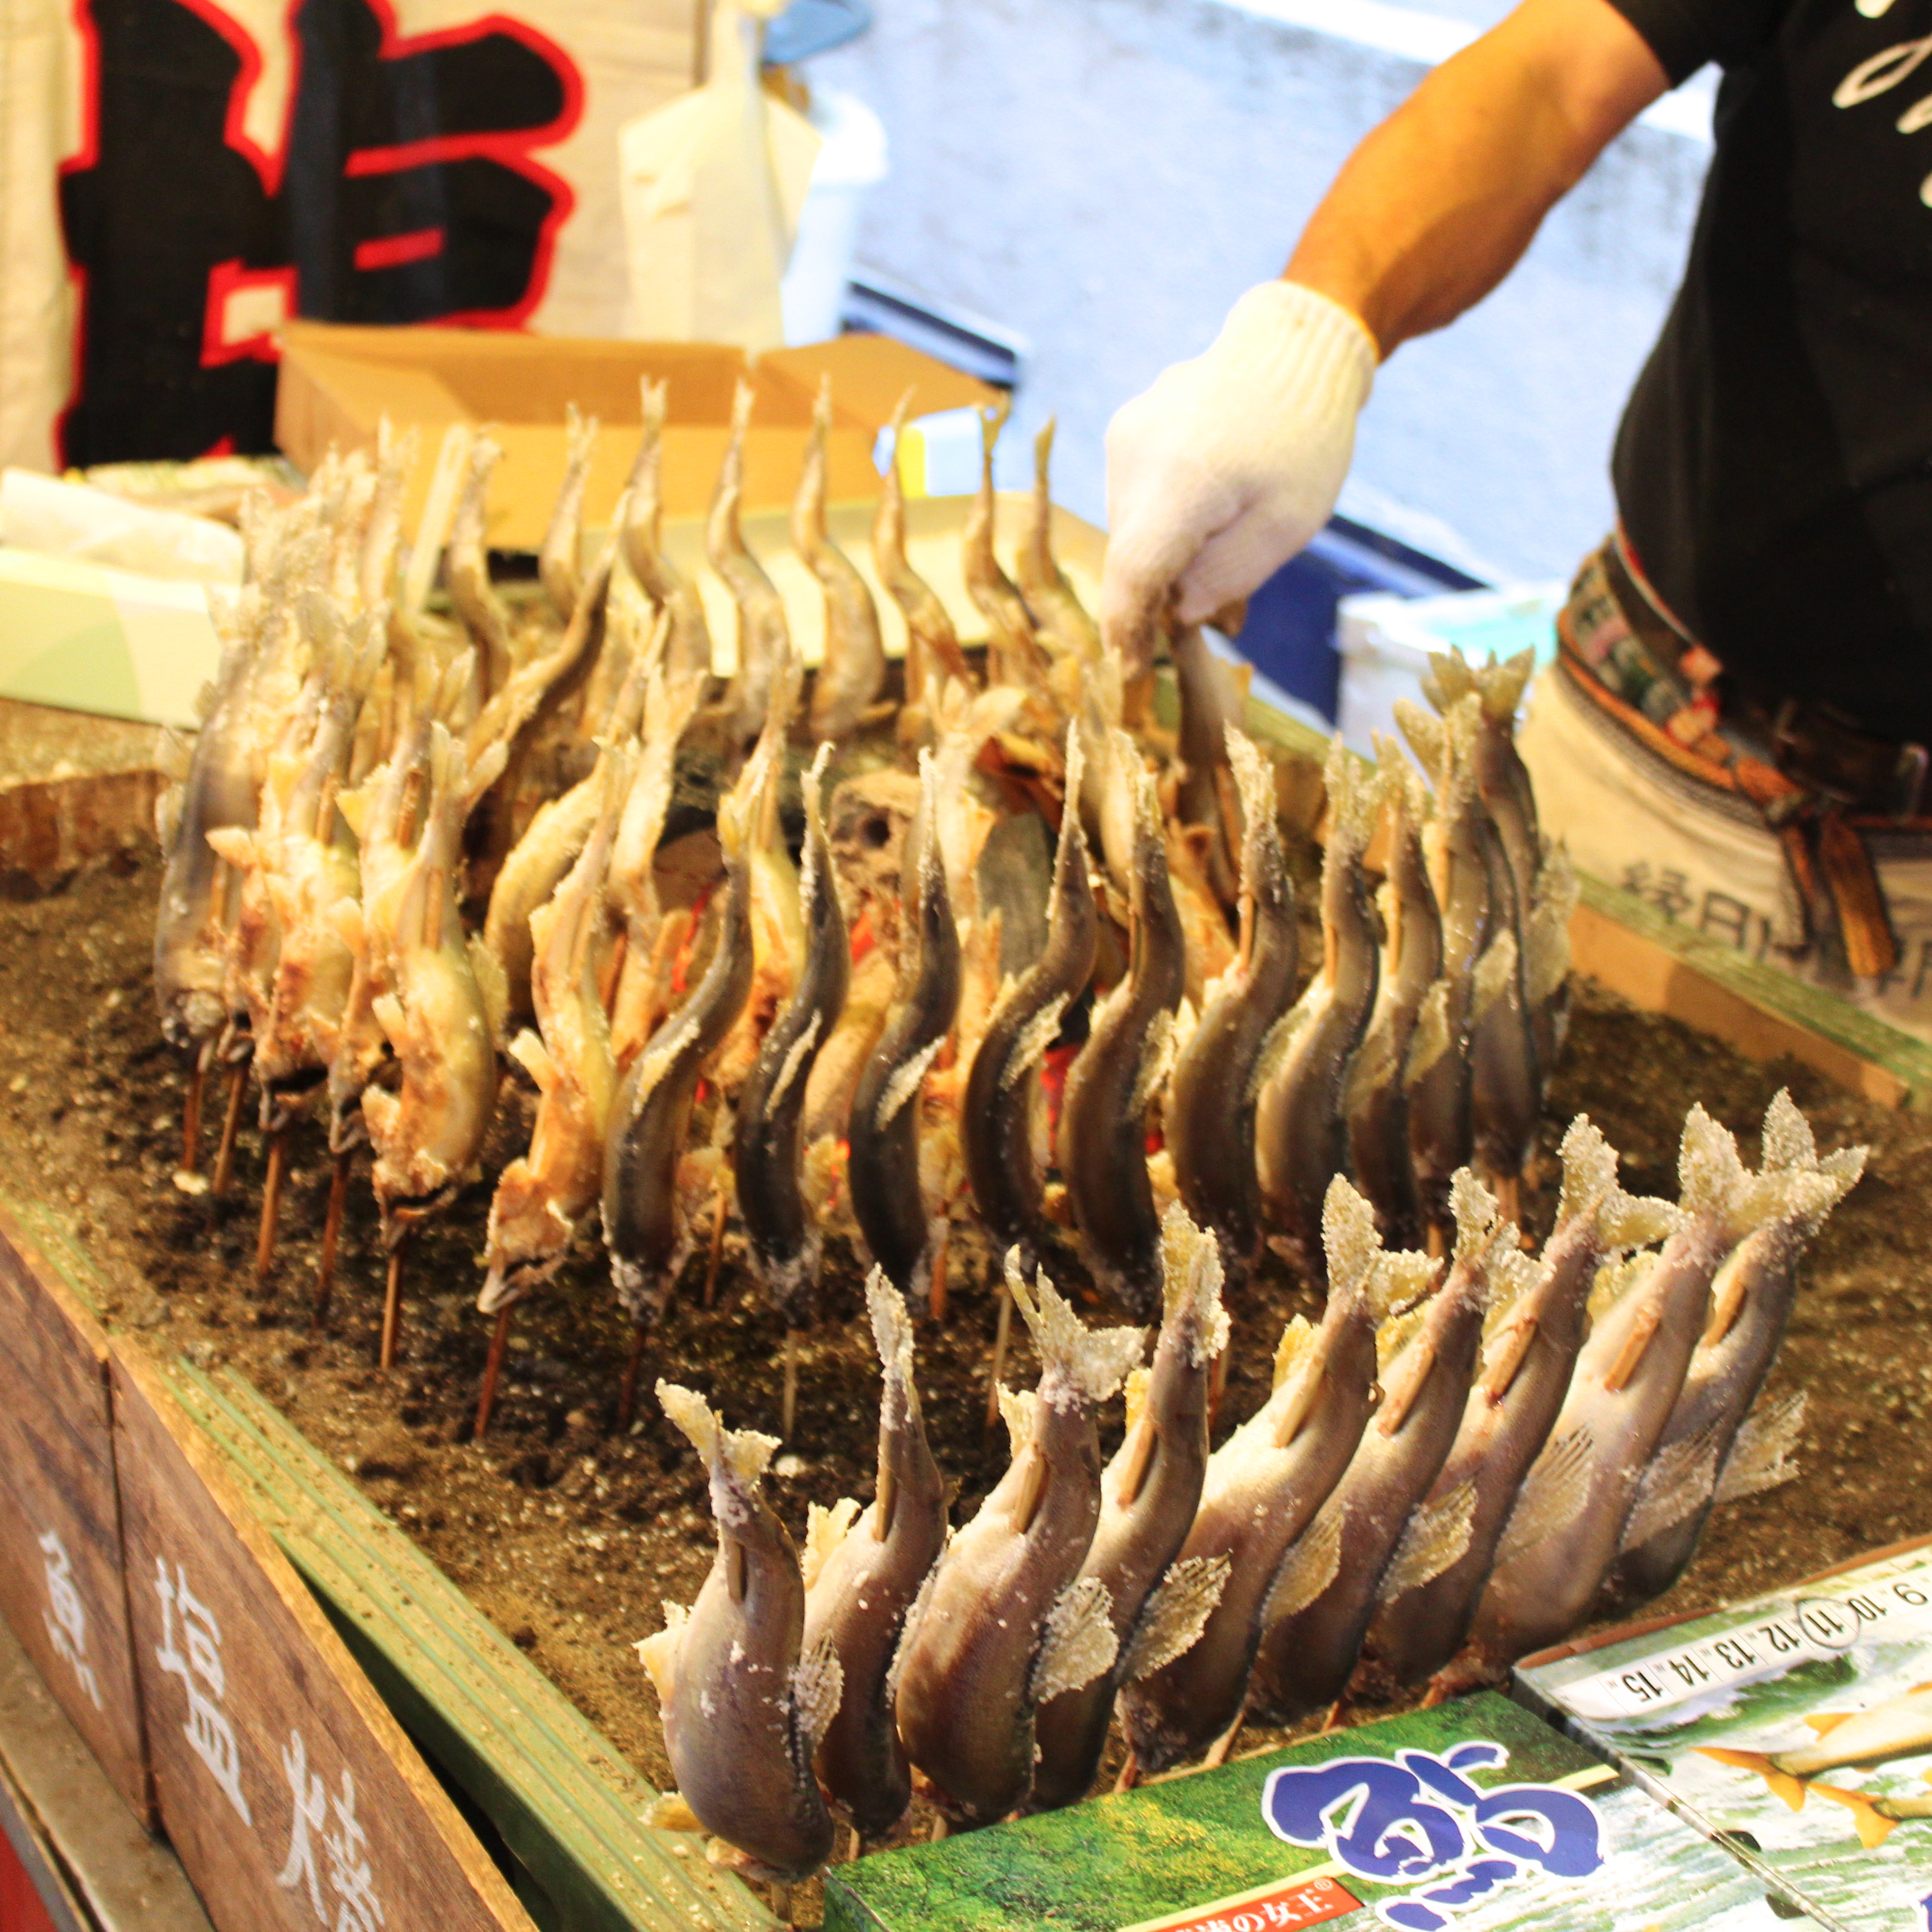 Small fish skewered and roasted.  The skin is crispy and salty while the meat is moist and tender.